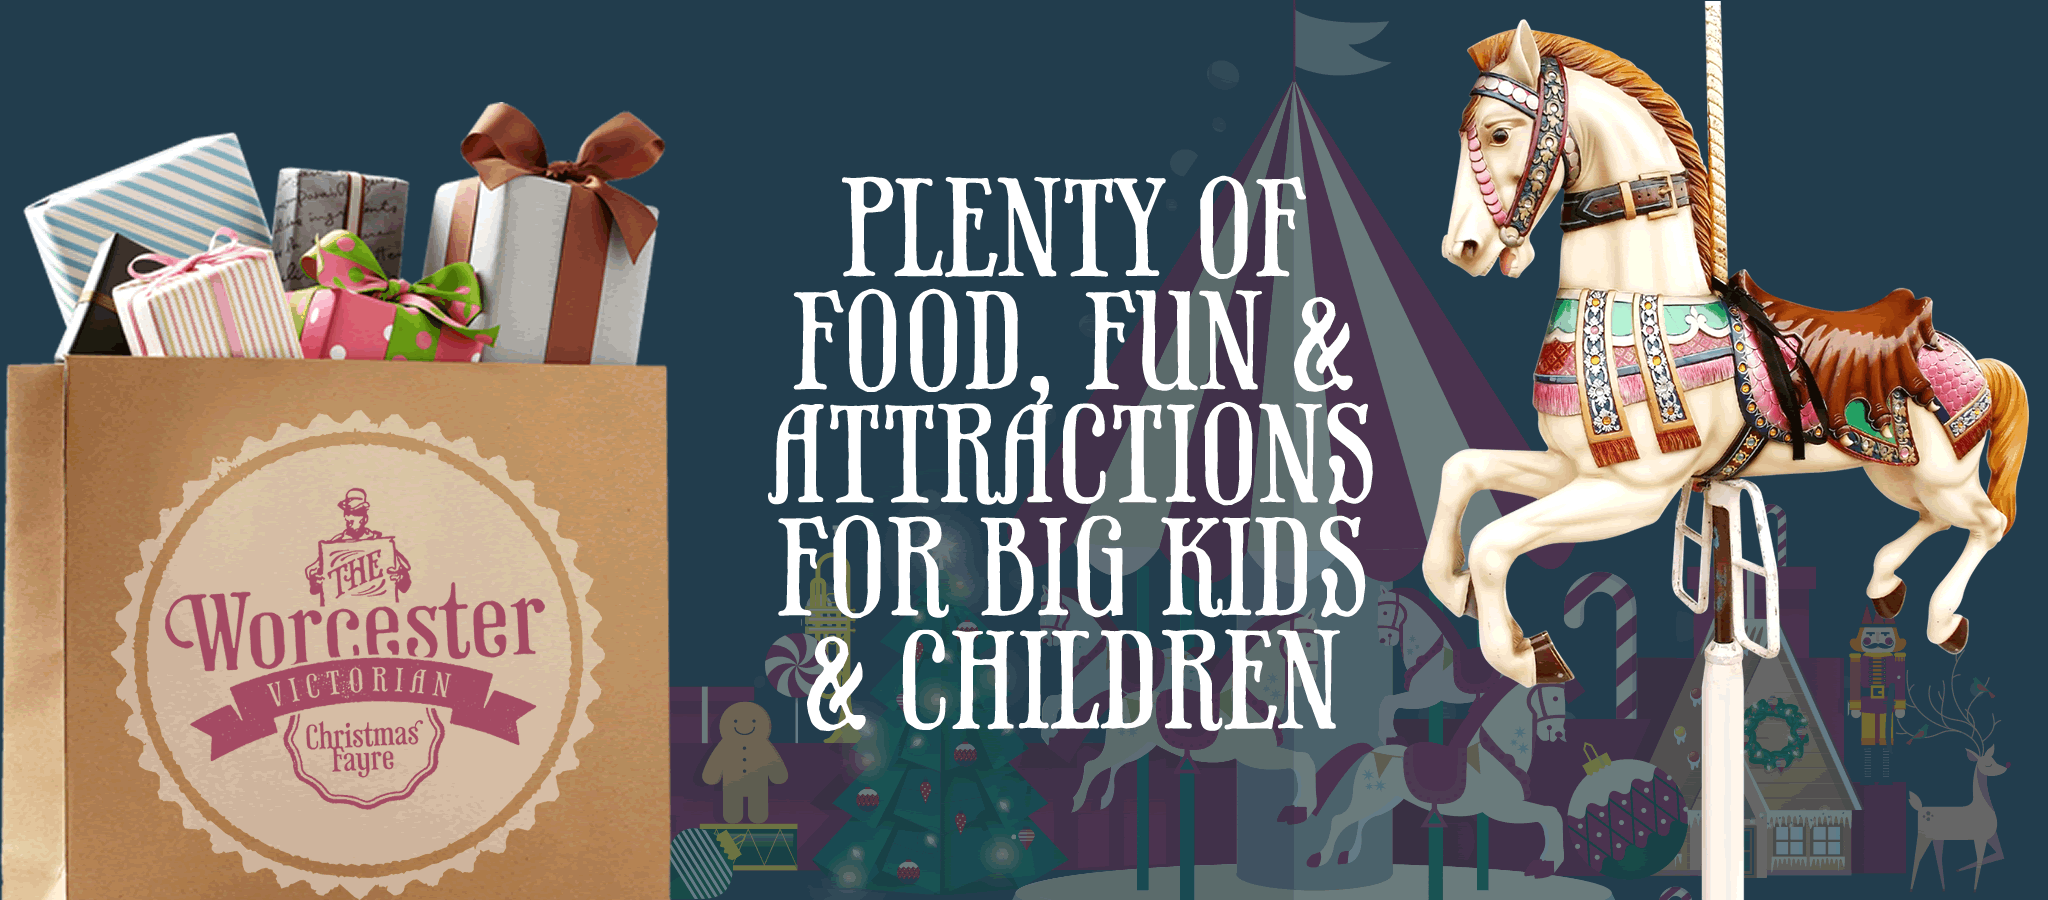 Plenty of fun, food and attractions for big kids and children